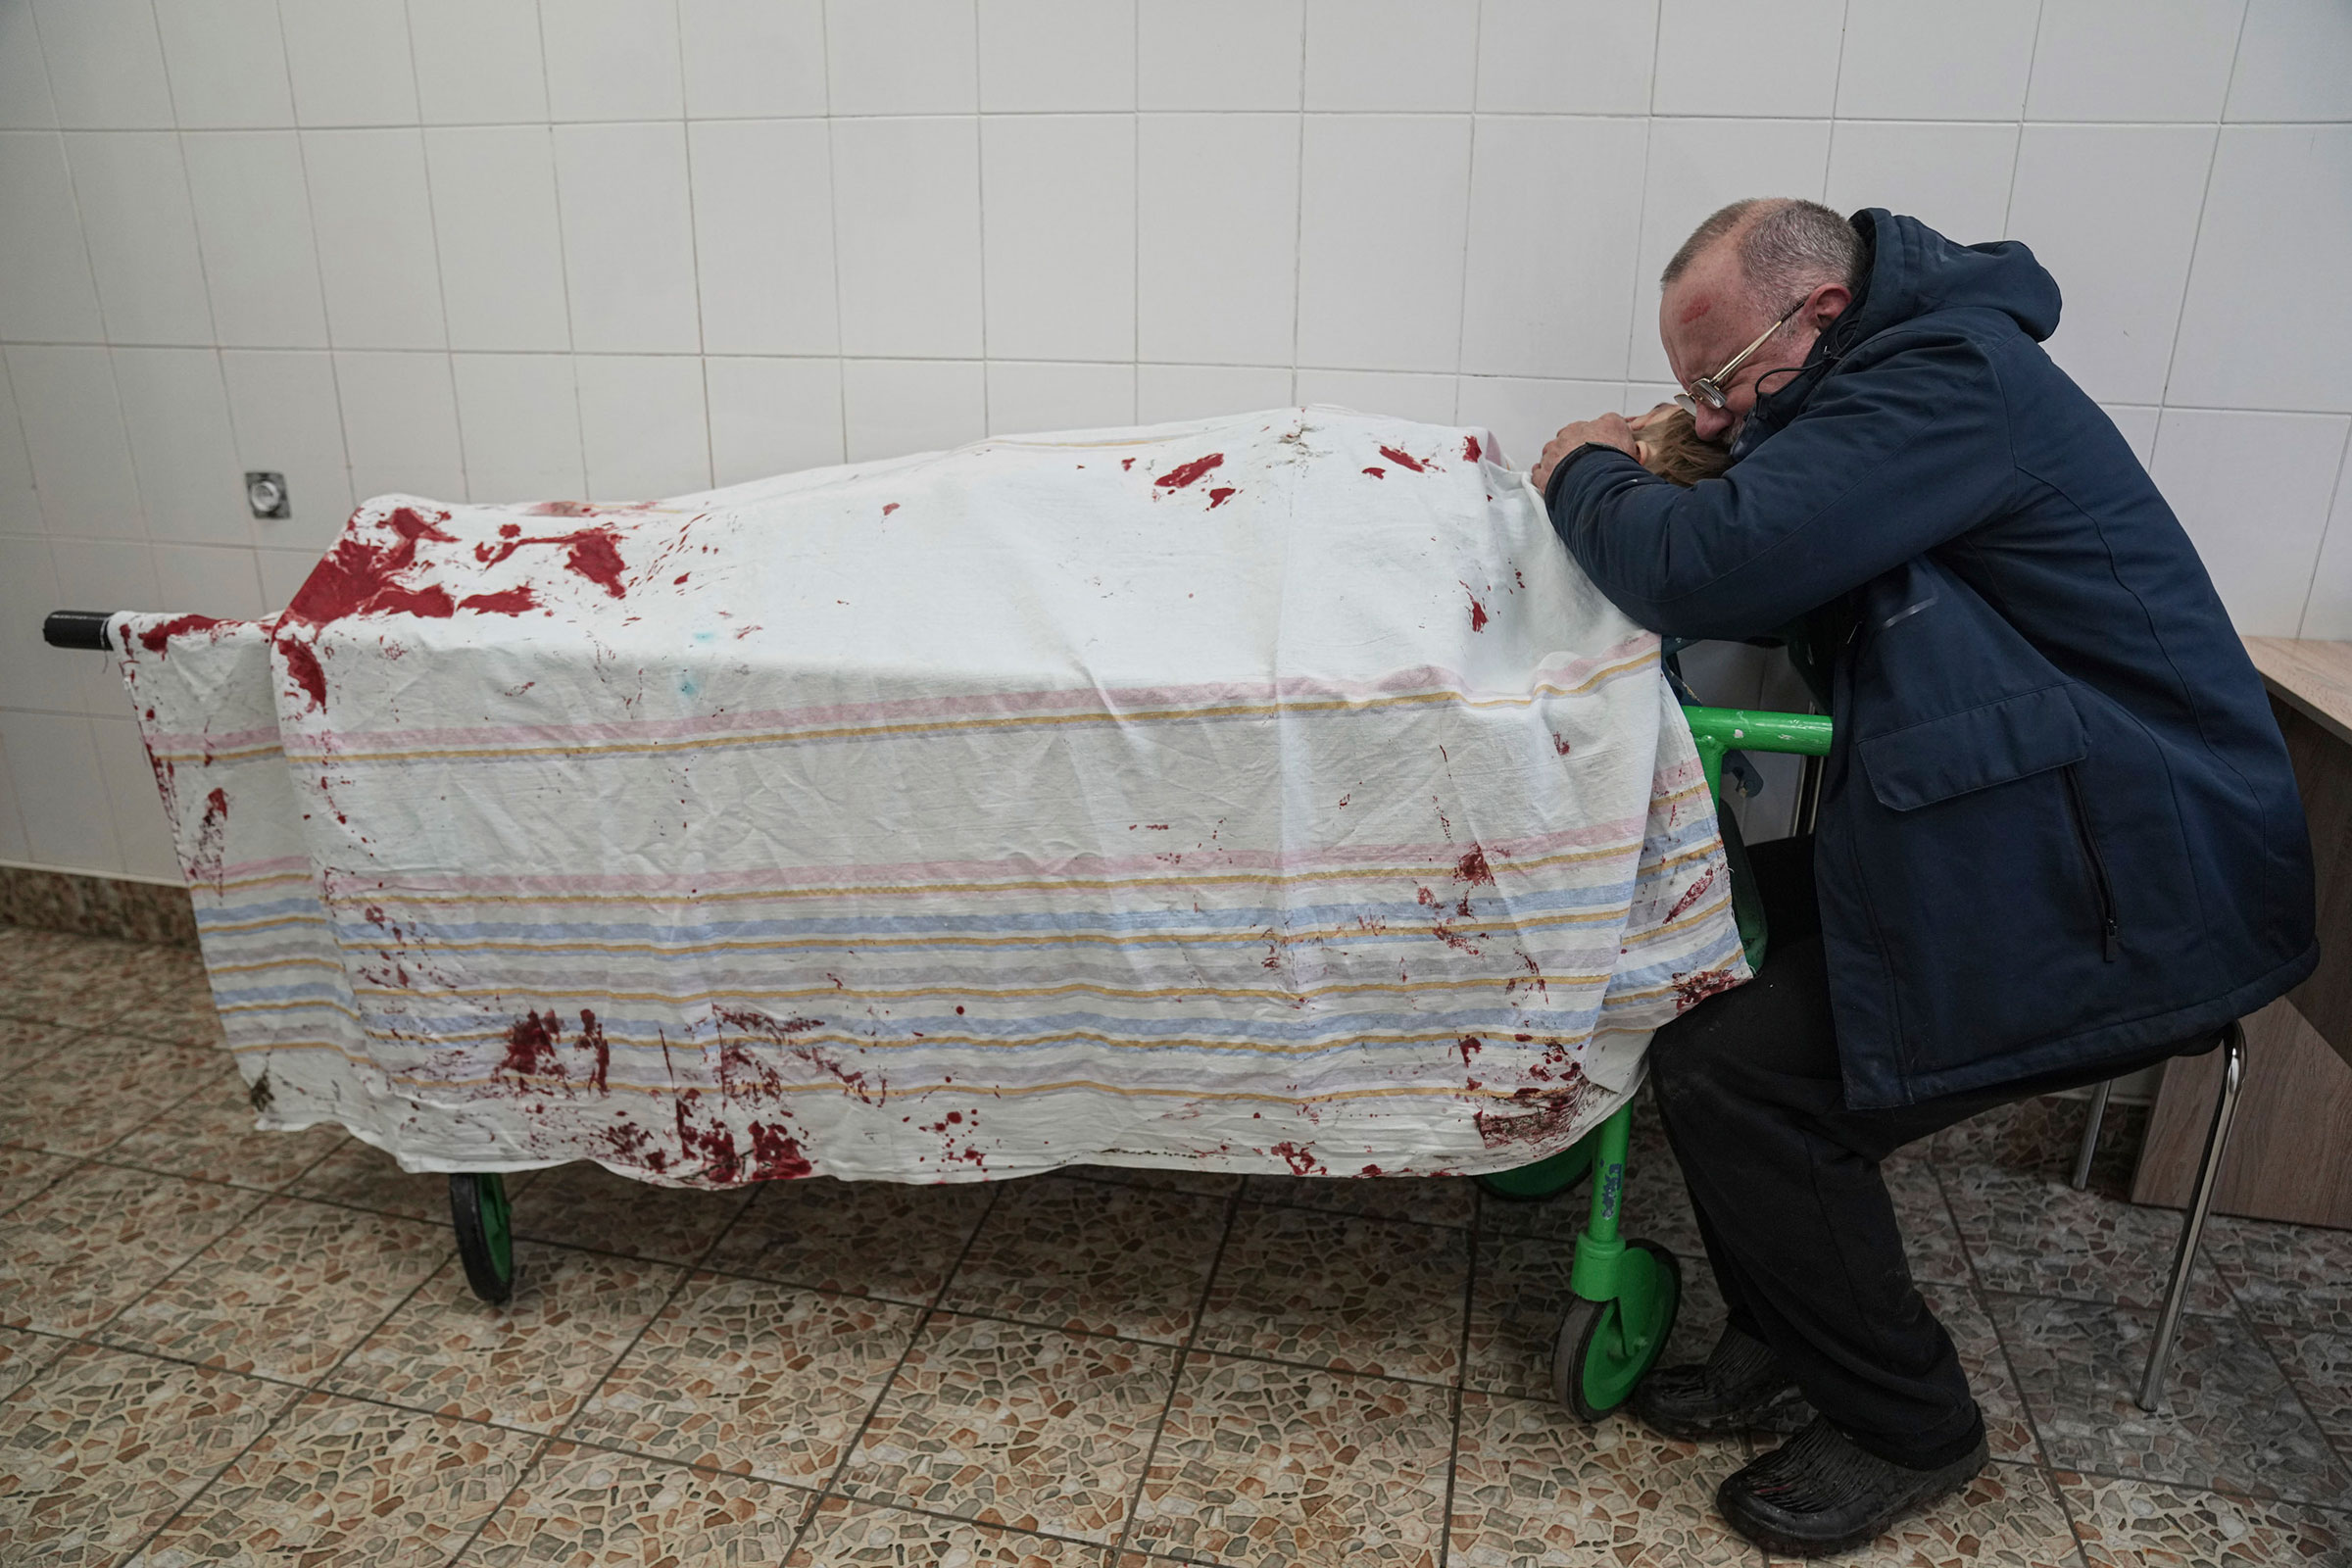 Serhii, father of teenager Iliya, cries on his son's lifeless body lying on a stretcher at a maternity hospital converted into a medical ward in Mariupol on March 2. Iliya was fatally wounded Wednesday while playing soccer in Mariupol when shelling started amid the Russian invasion of Ukraine. The explosive hit the soccer field near a school in the Azov Sea city.